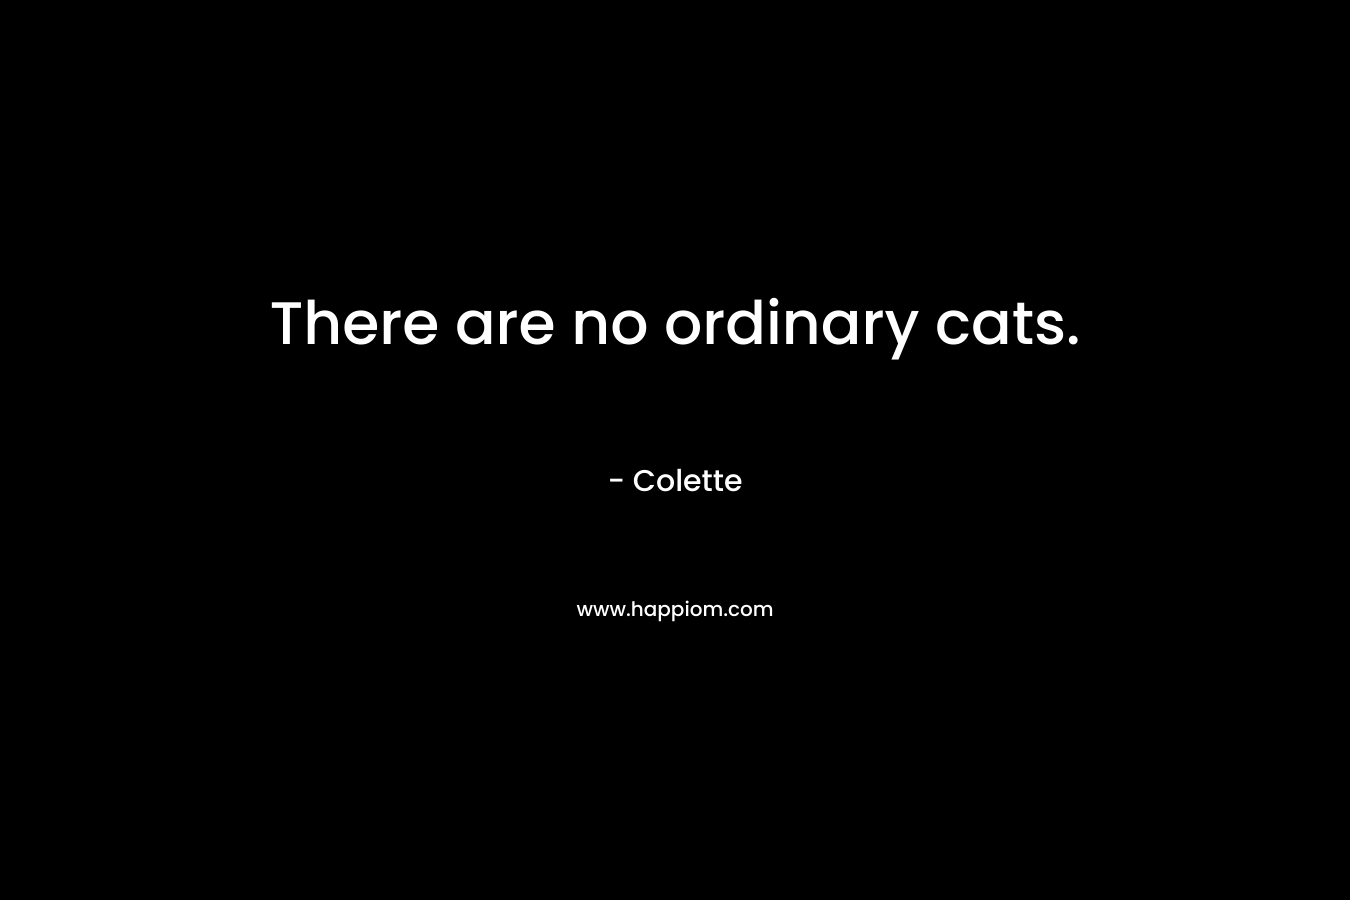 There are no ordinary cats. – Colette